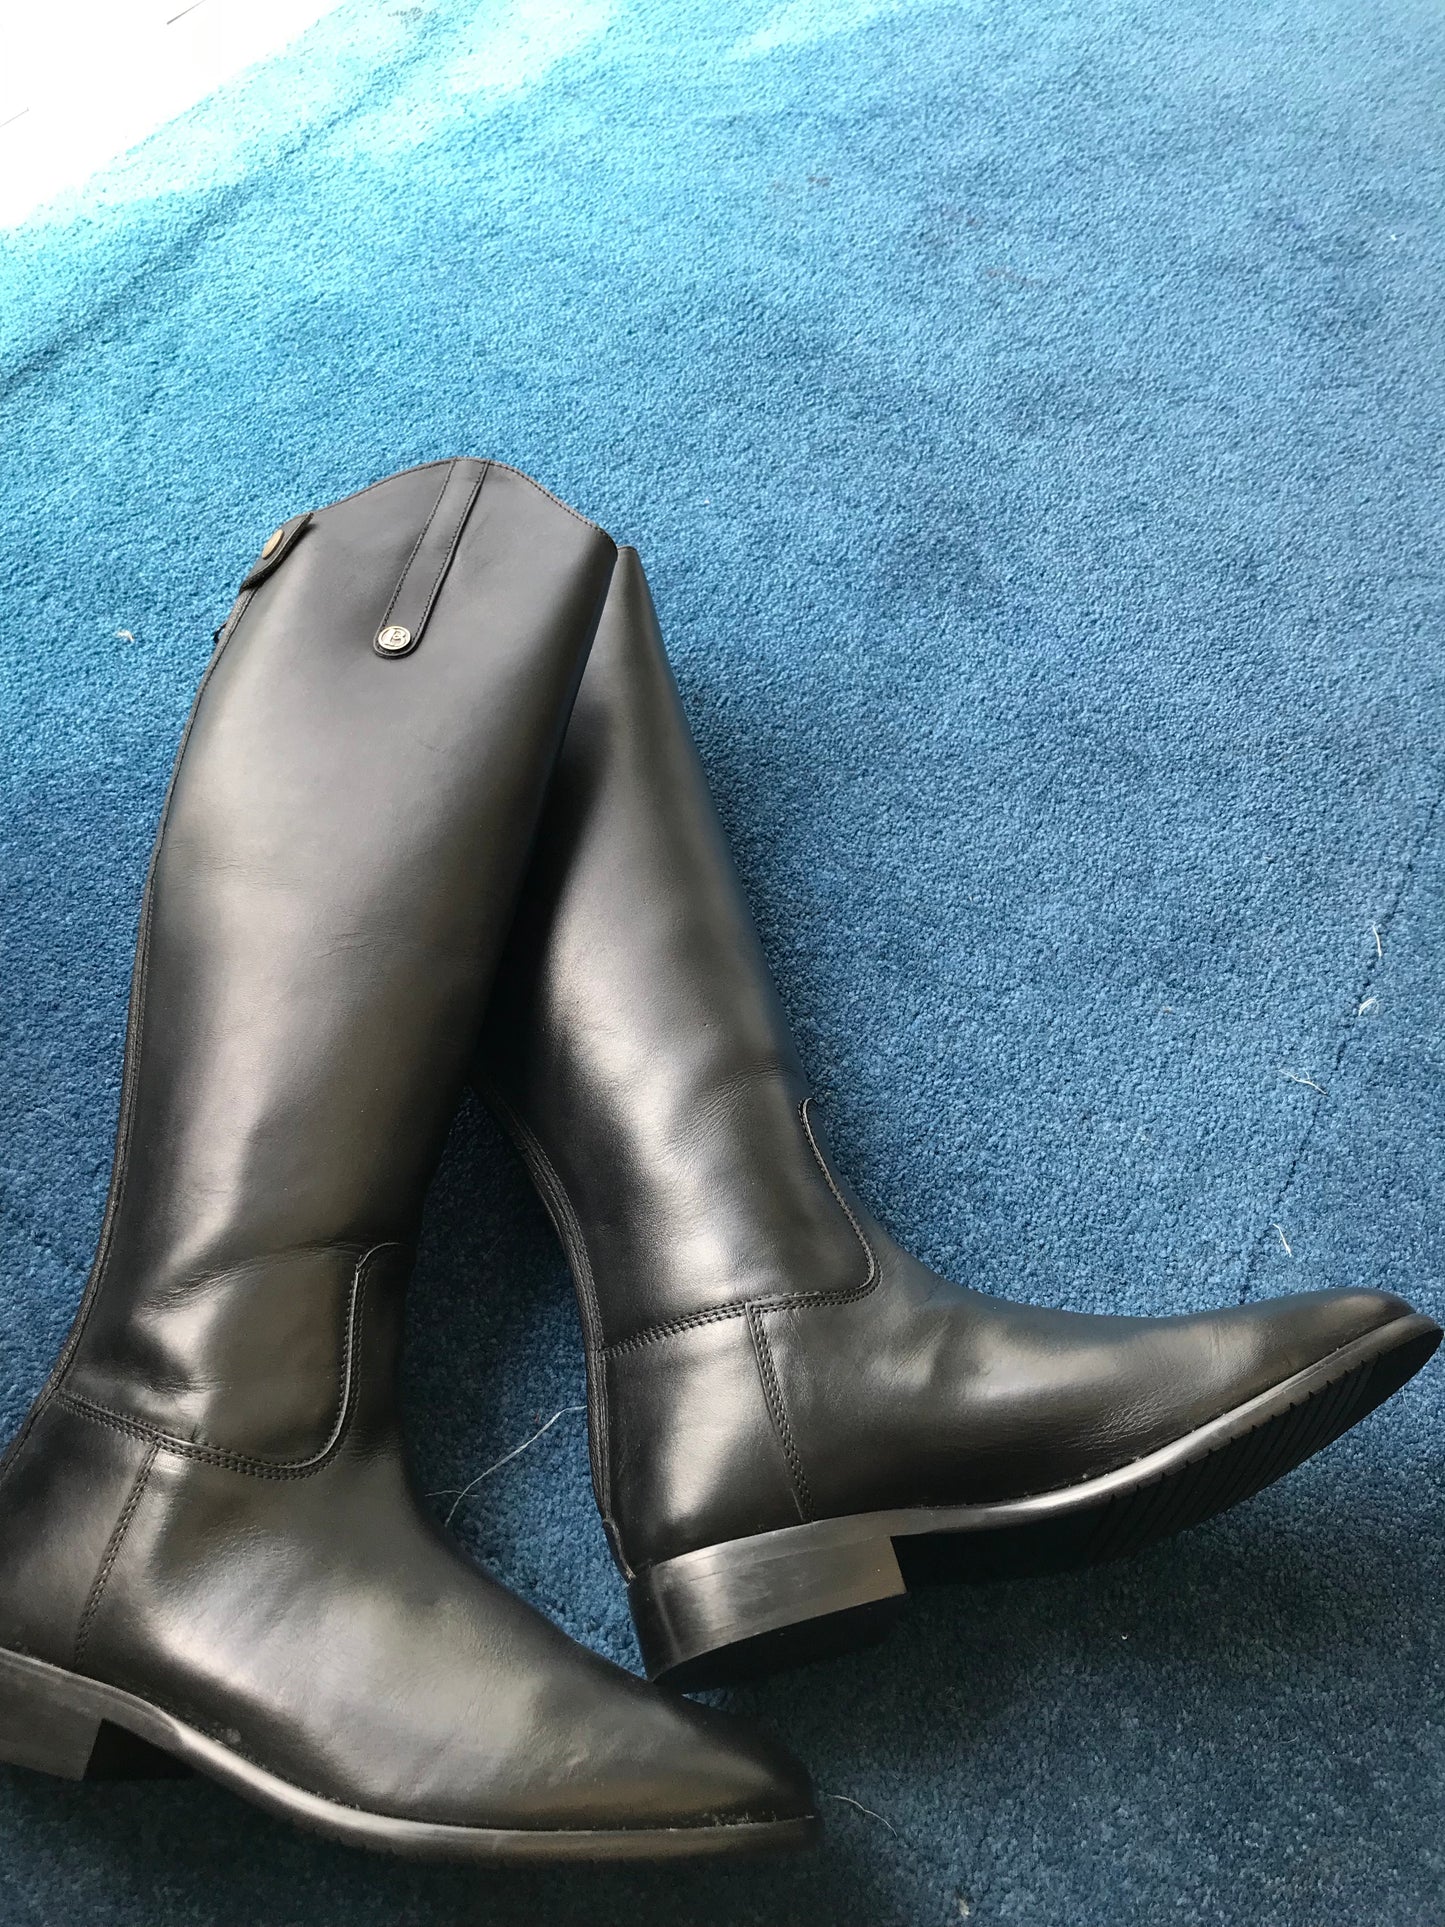 New brogini black long leather riding boots size 7 regular FREE POSTAGE✅